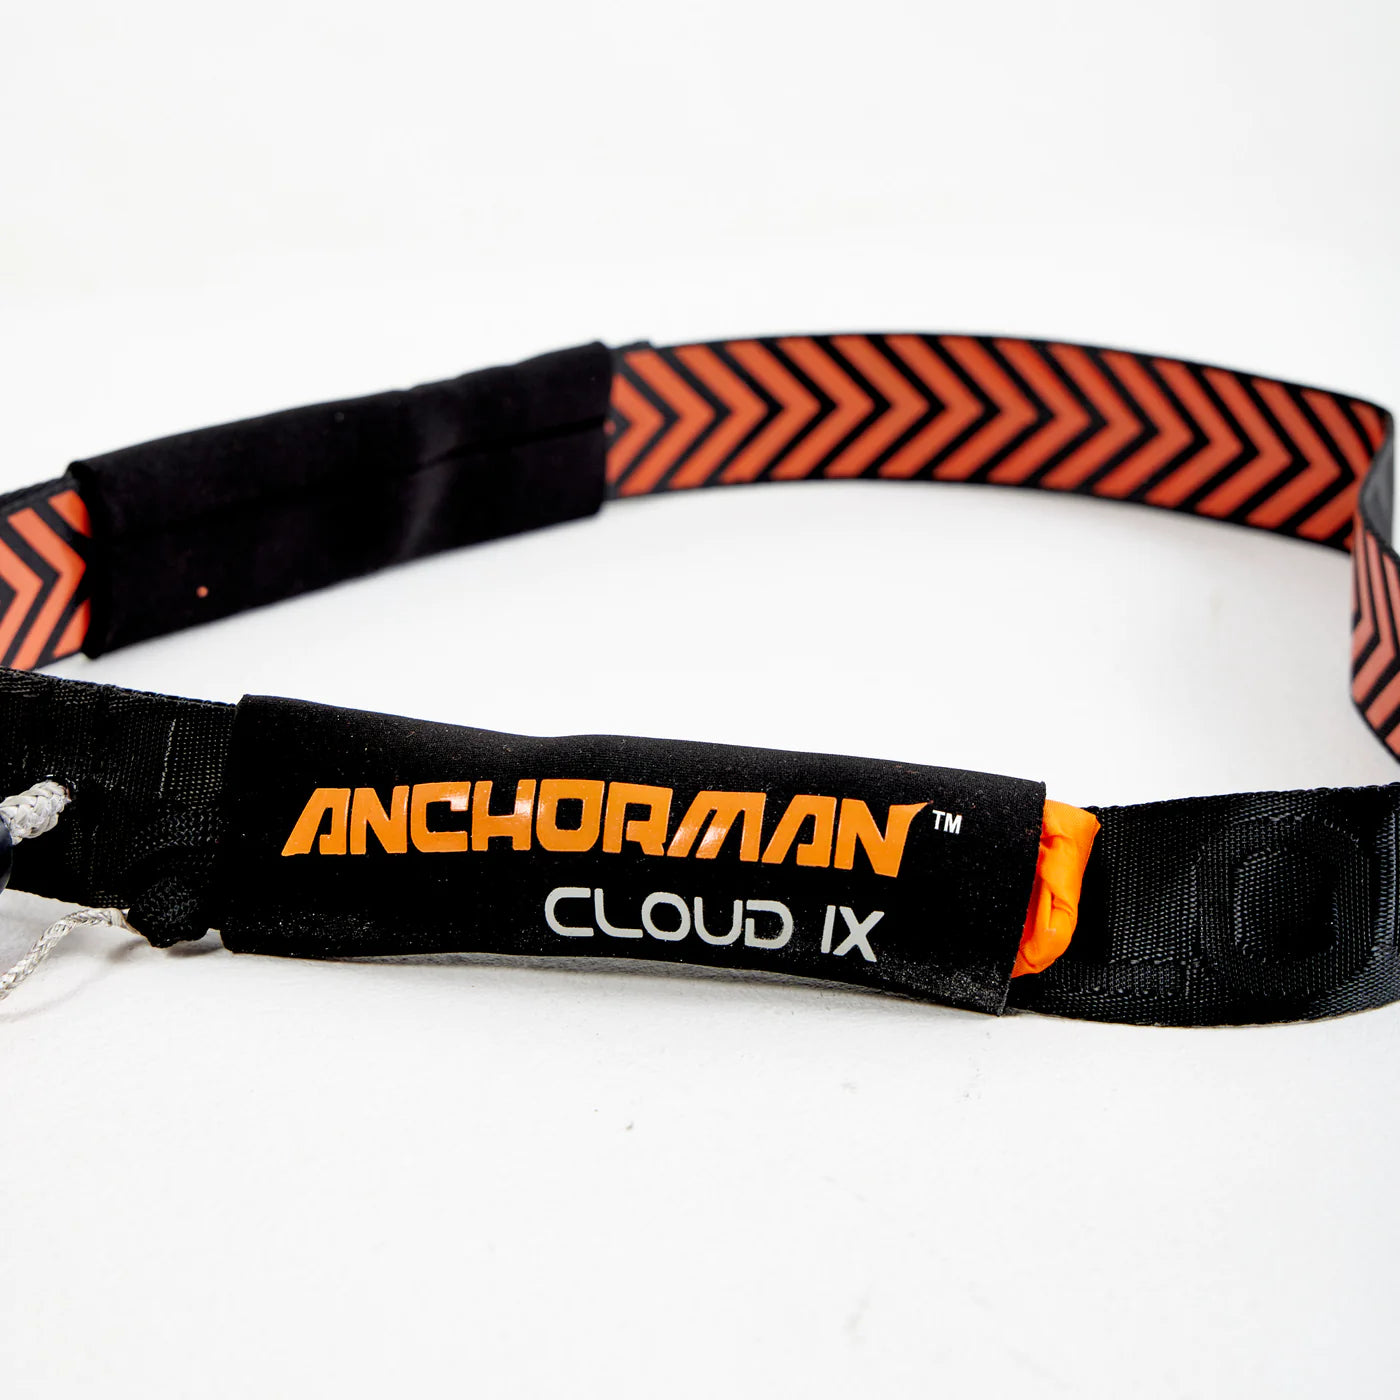 We are now working with Cloud 9 Anchorman Leash